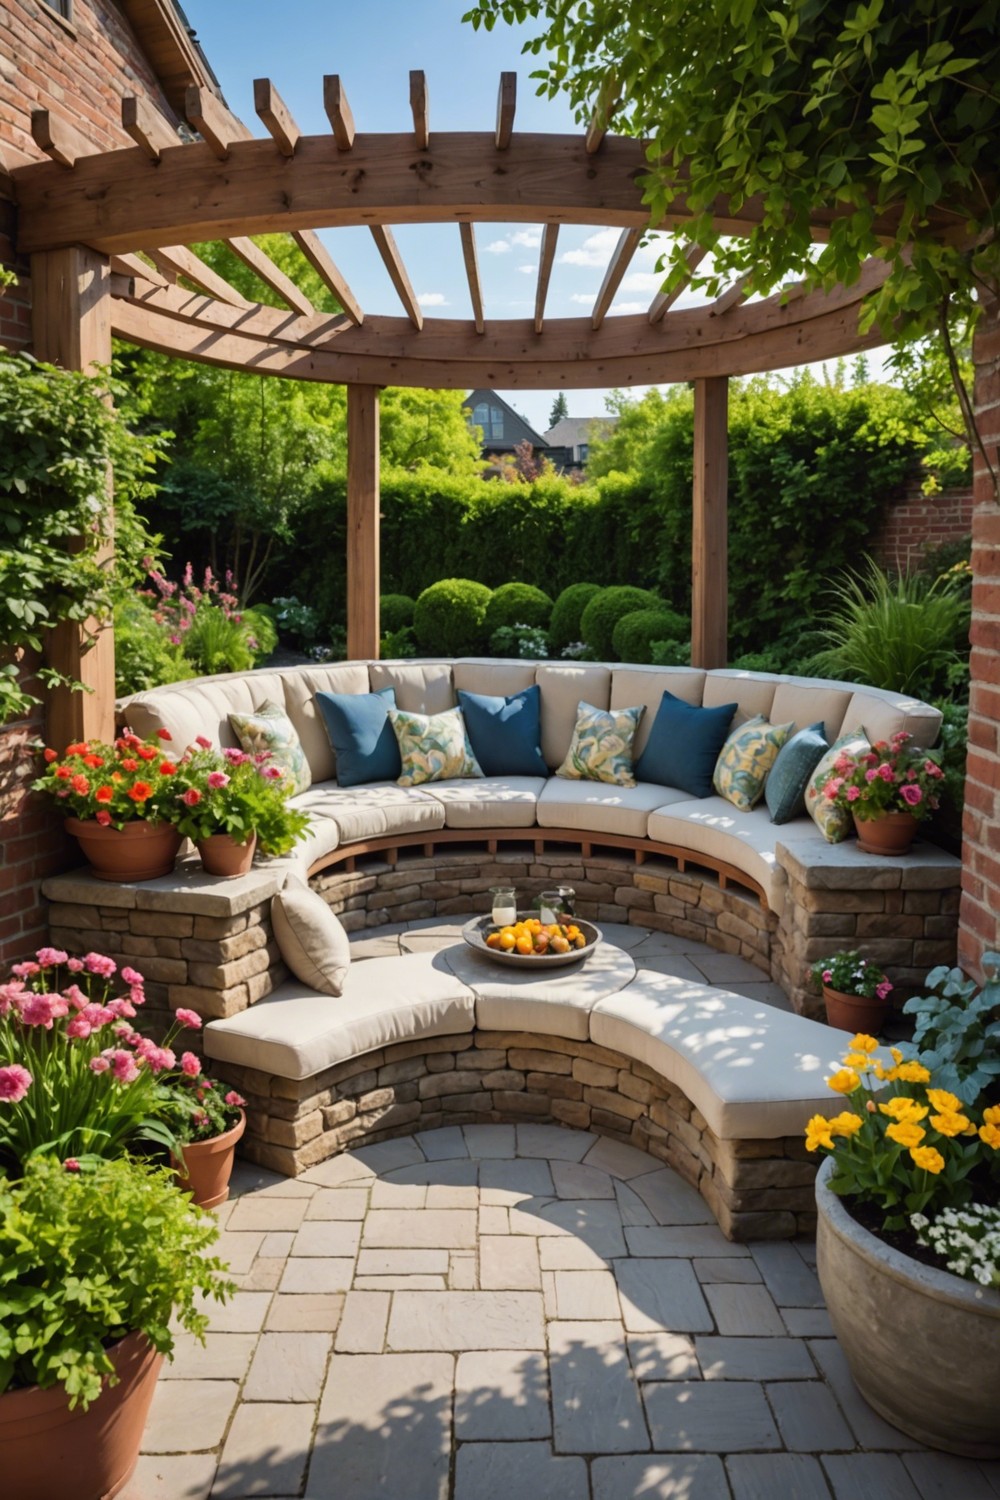 Patio with Built-In Bench Seating